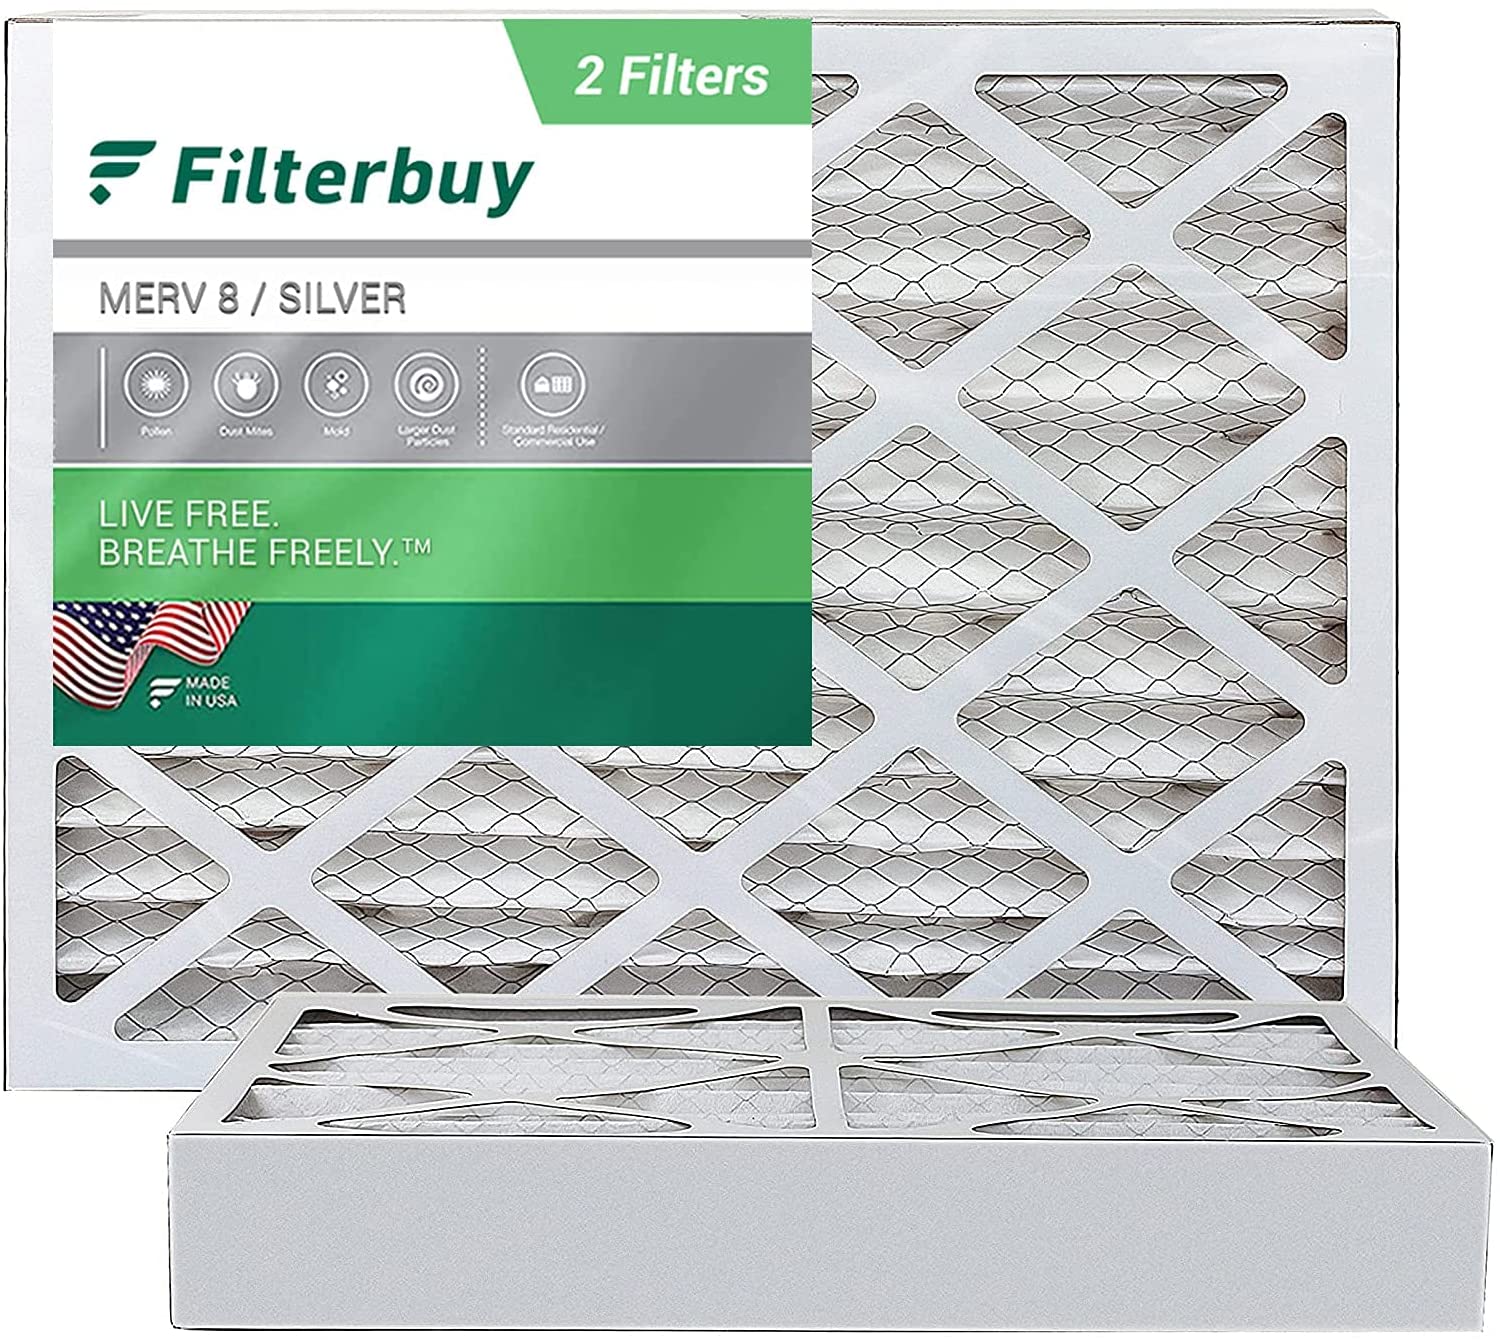 FilterBuy Standard Residential 20x25x4-Inch Furnace Filters, 2-Pack